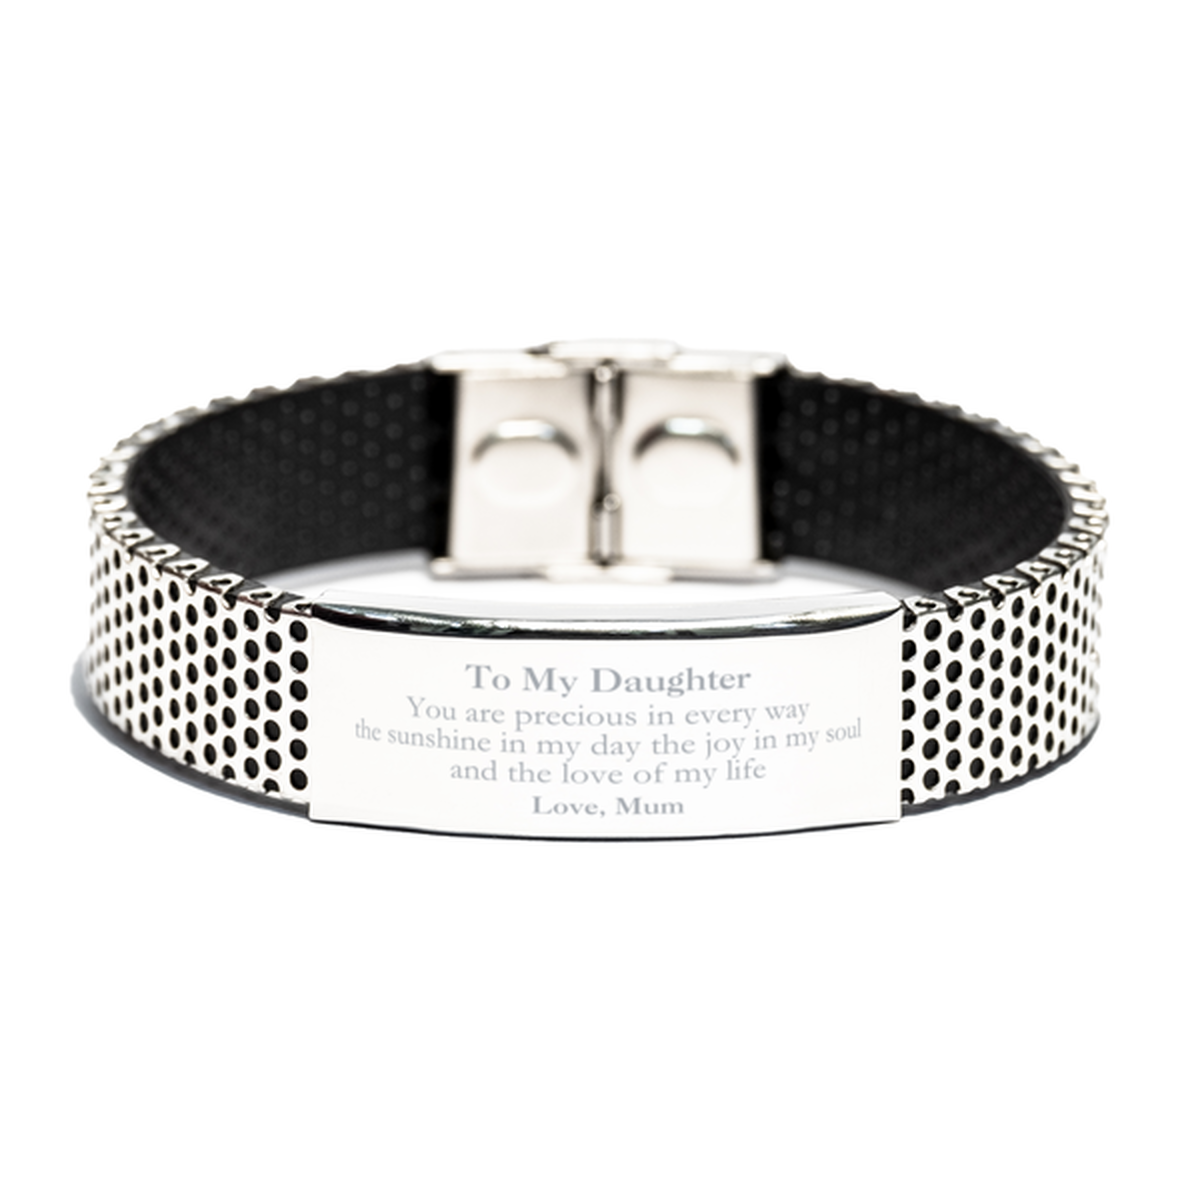 Graduation Gifts for Daughter Stainless Steel Bracelet Present from Mum, Christmas Daughter Birthday Gifts Daughter You are precious in every way the sunshine in my day. Love, Mum